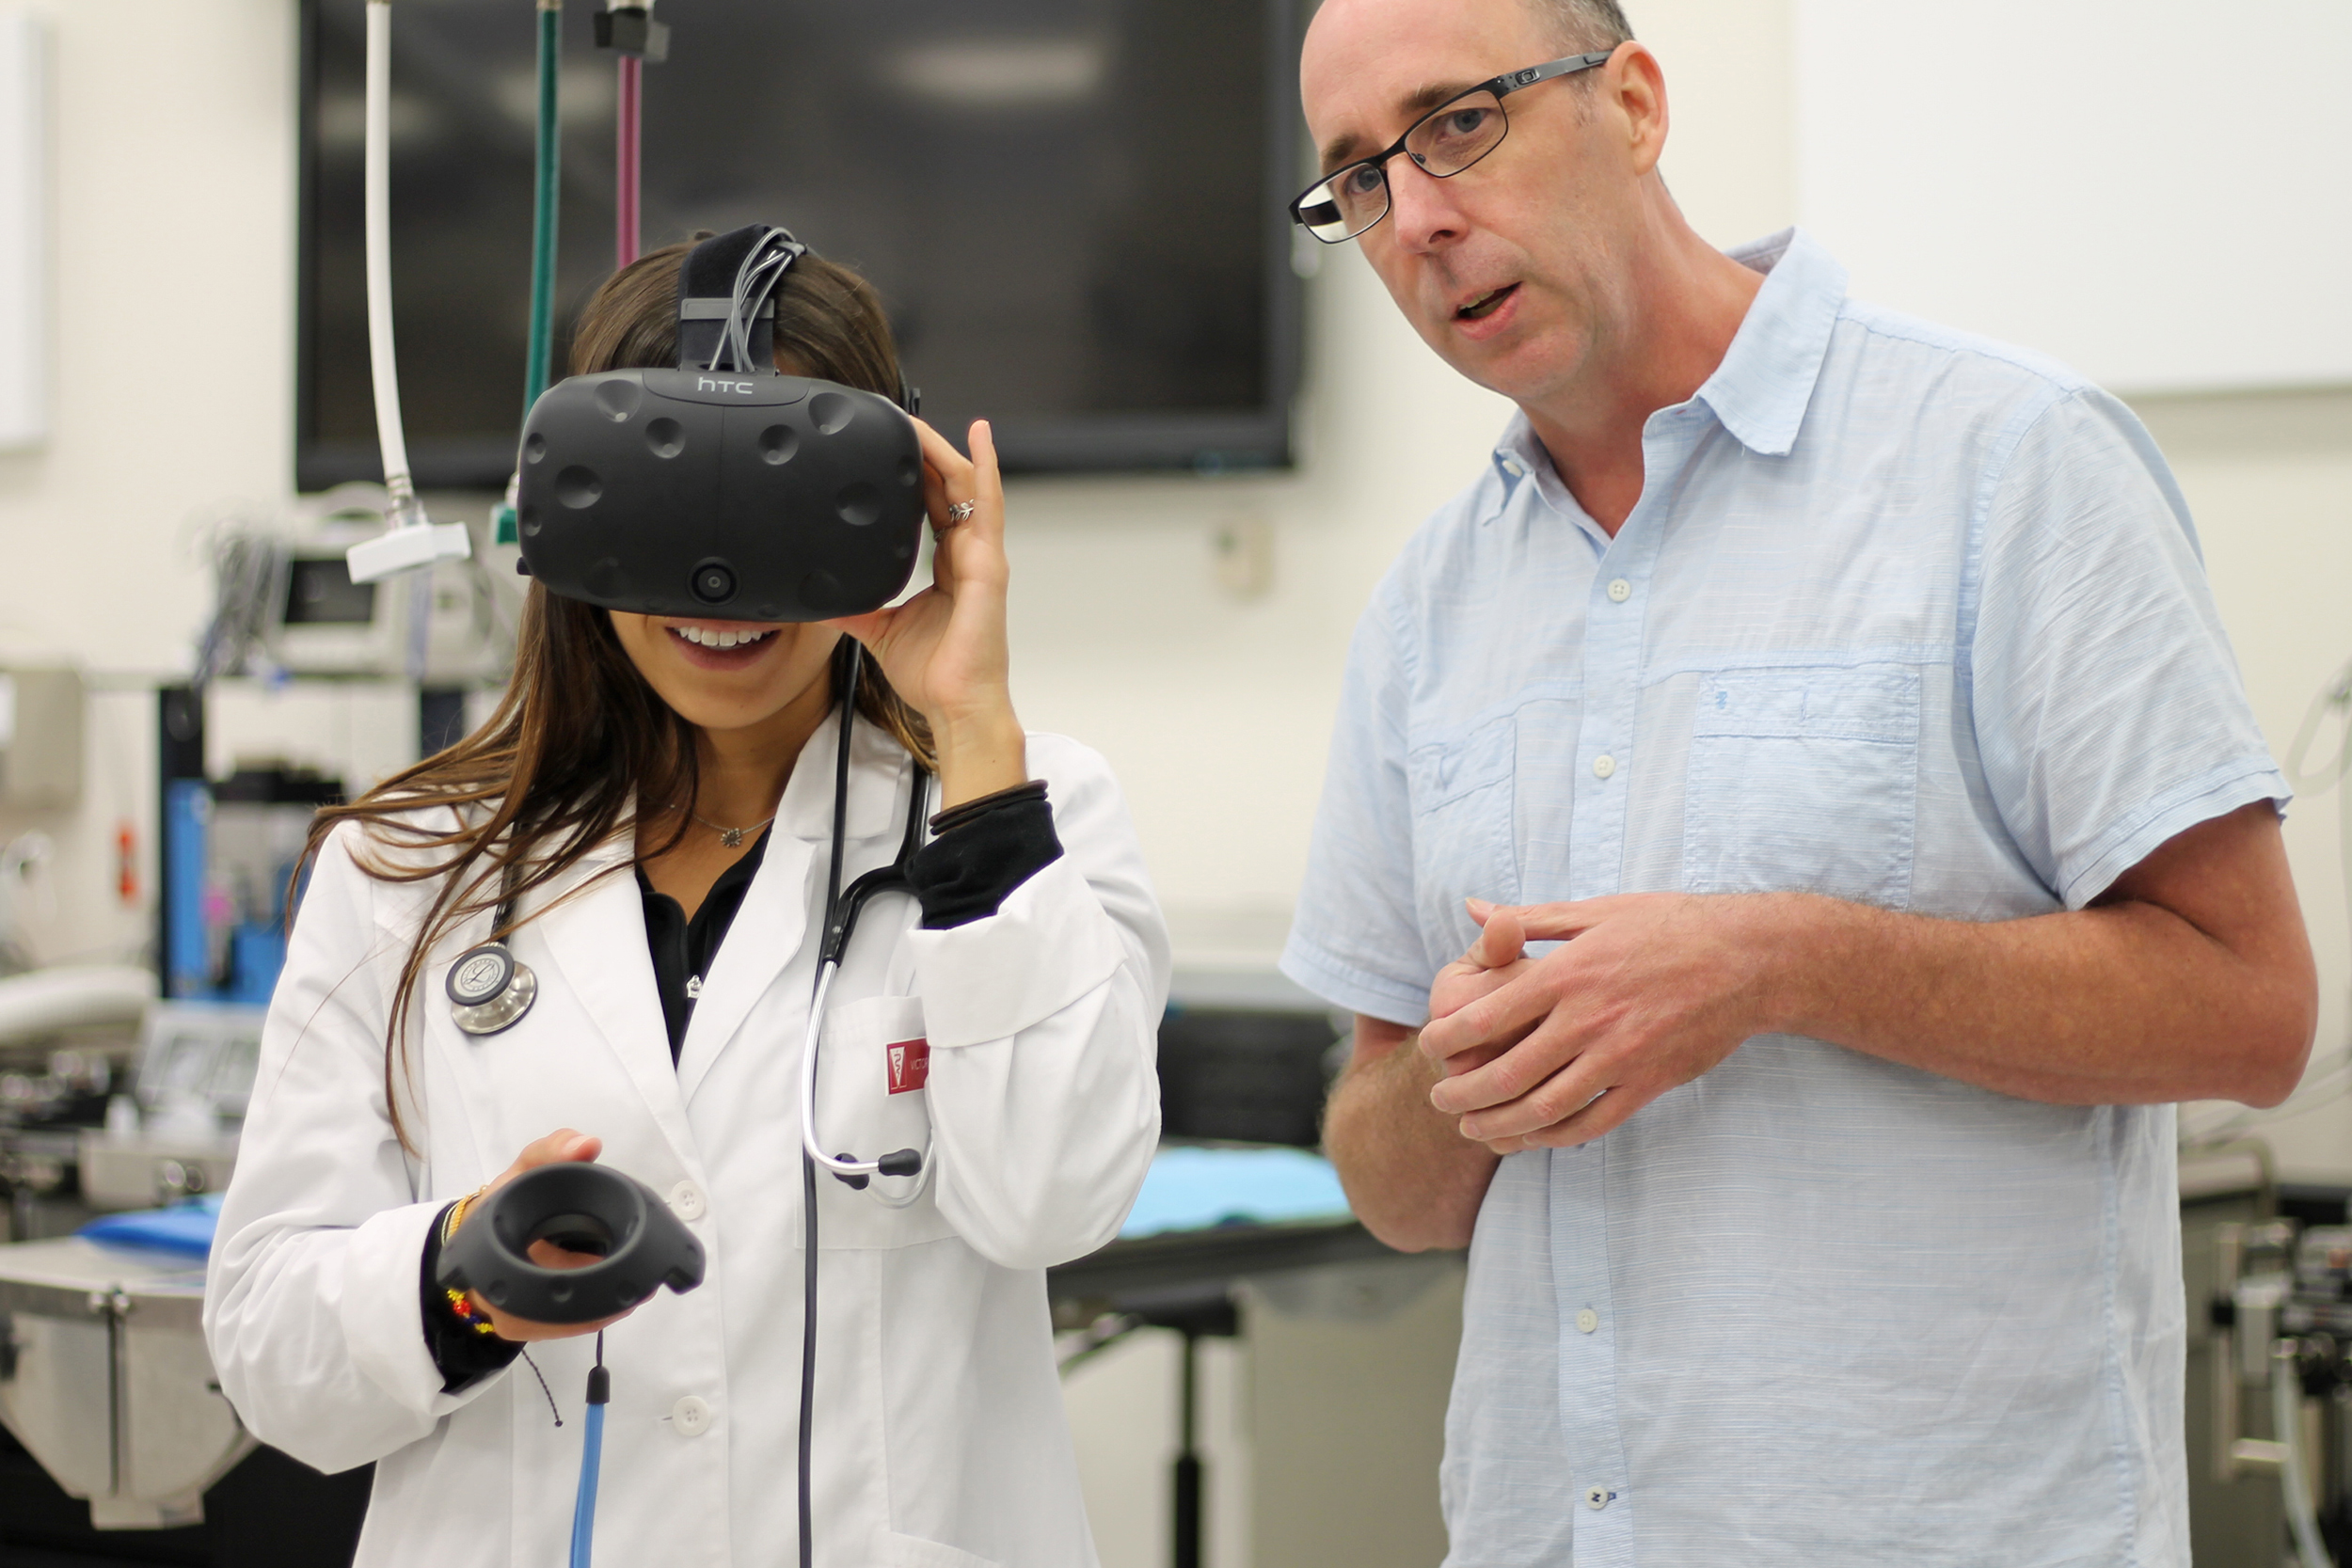 veterinary student uses a virtual reality headset